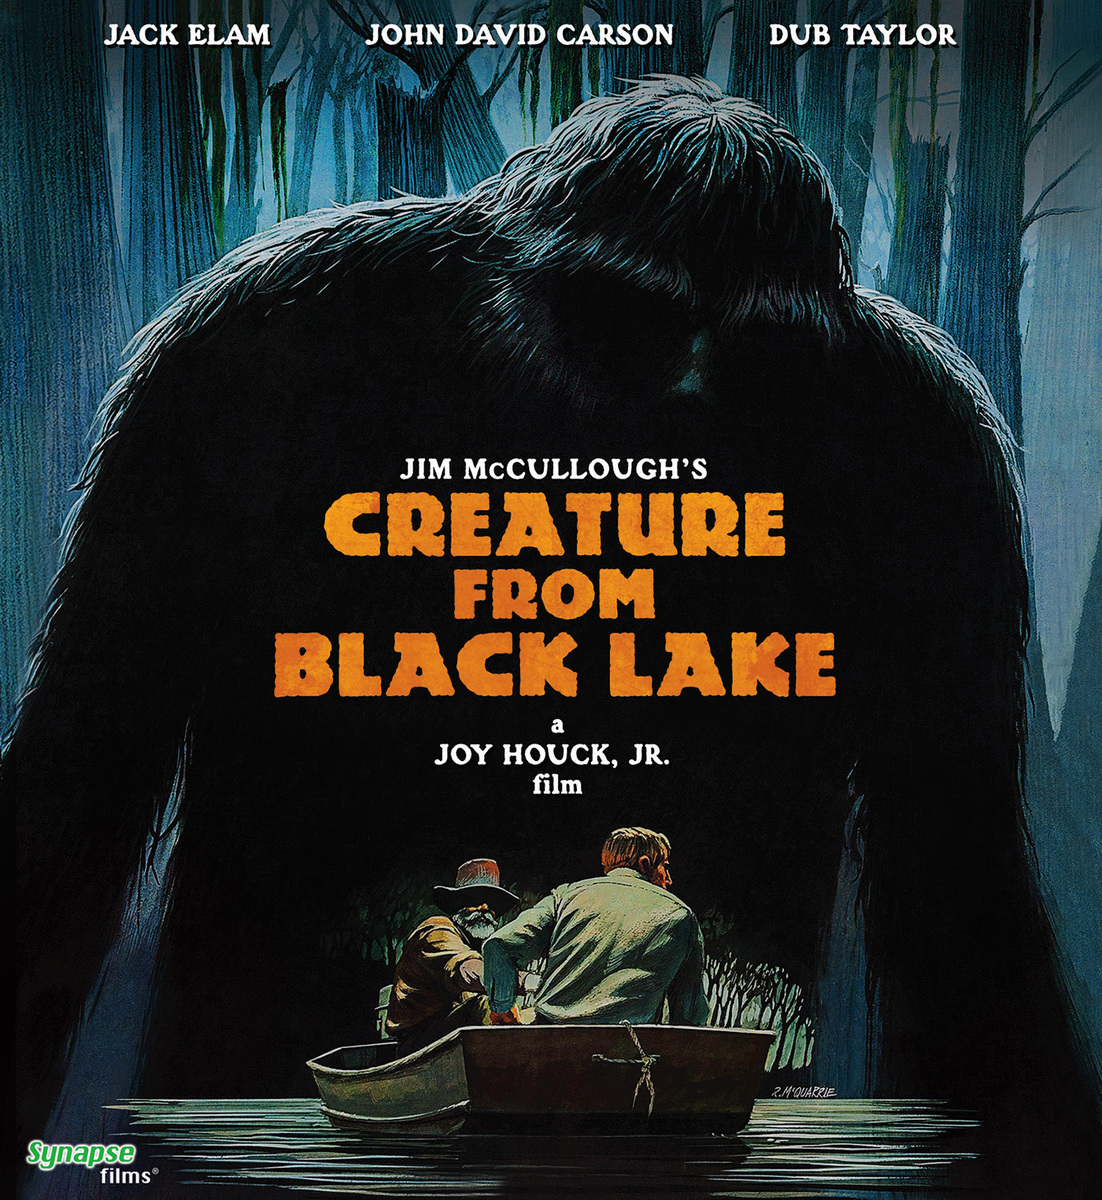 Creature From Black Lake Bigfoot Movies, Bigfoot Pictures,, 55% OFF